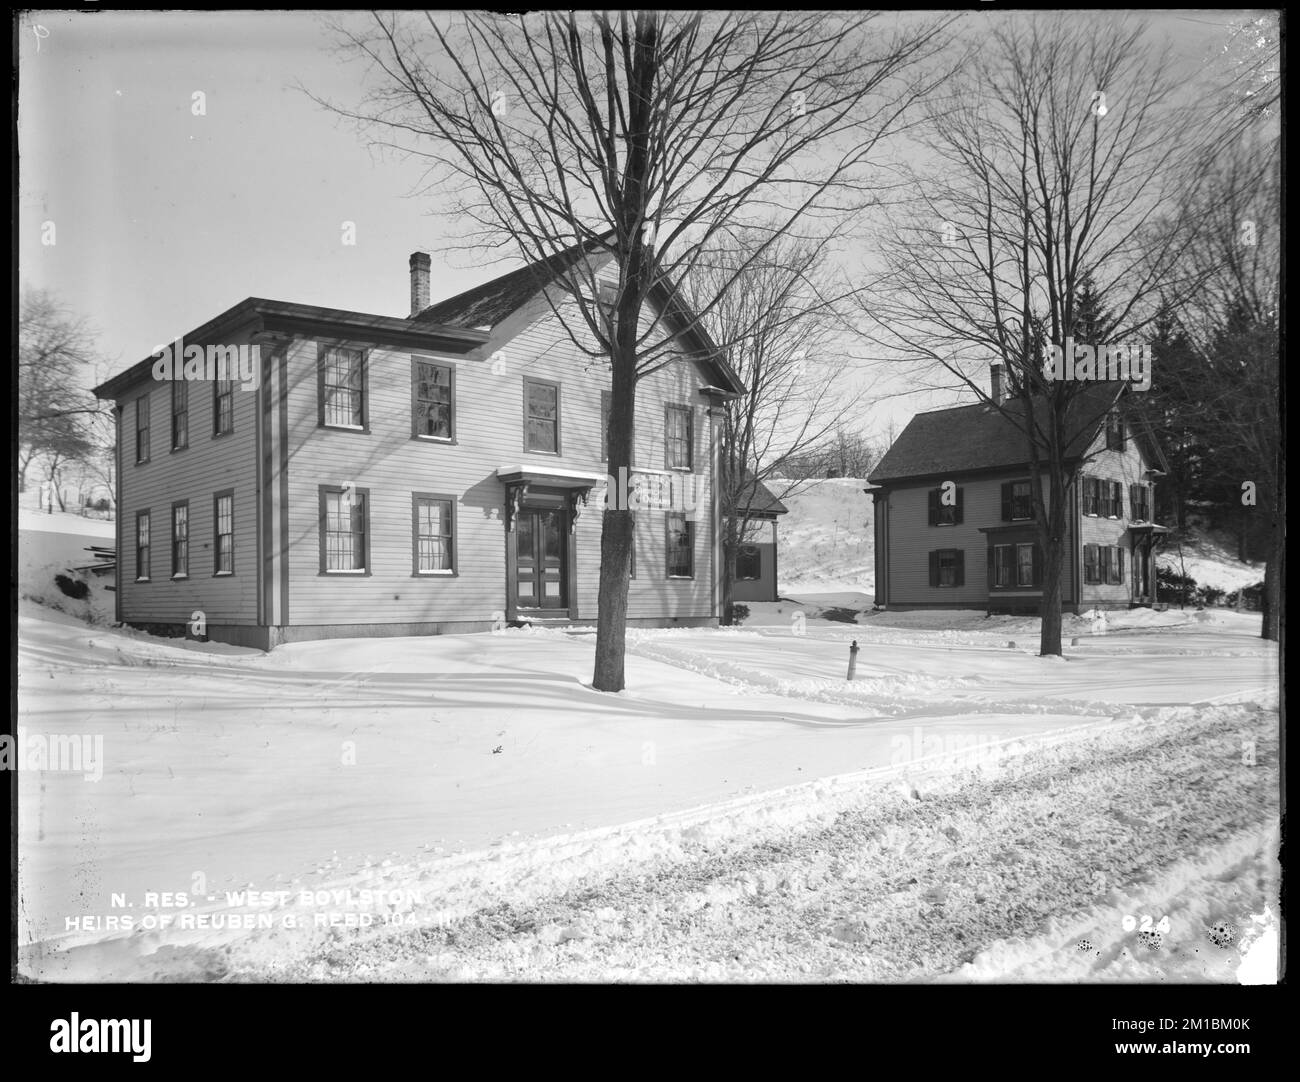 Wachusett Reservoir, Reuben G. Reed's heirs' buildings, on the east side of North Main Street, from the west in North Main Street, West Boylston, Mass., Dec. 17, 1896 , waterworks, reservoirs water distribution structures, real estate, identification signs Stock Photo